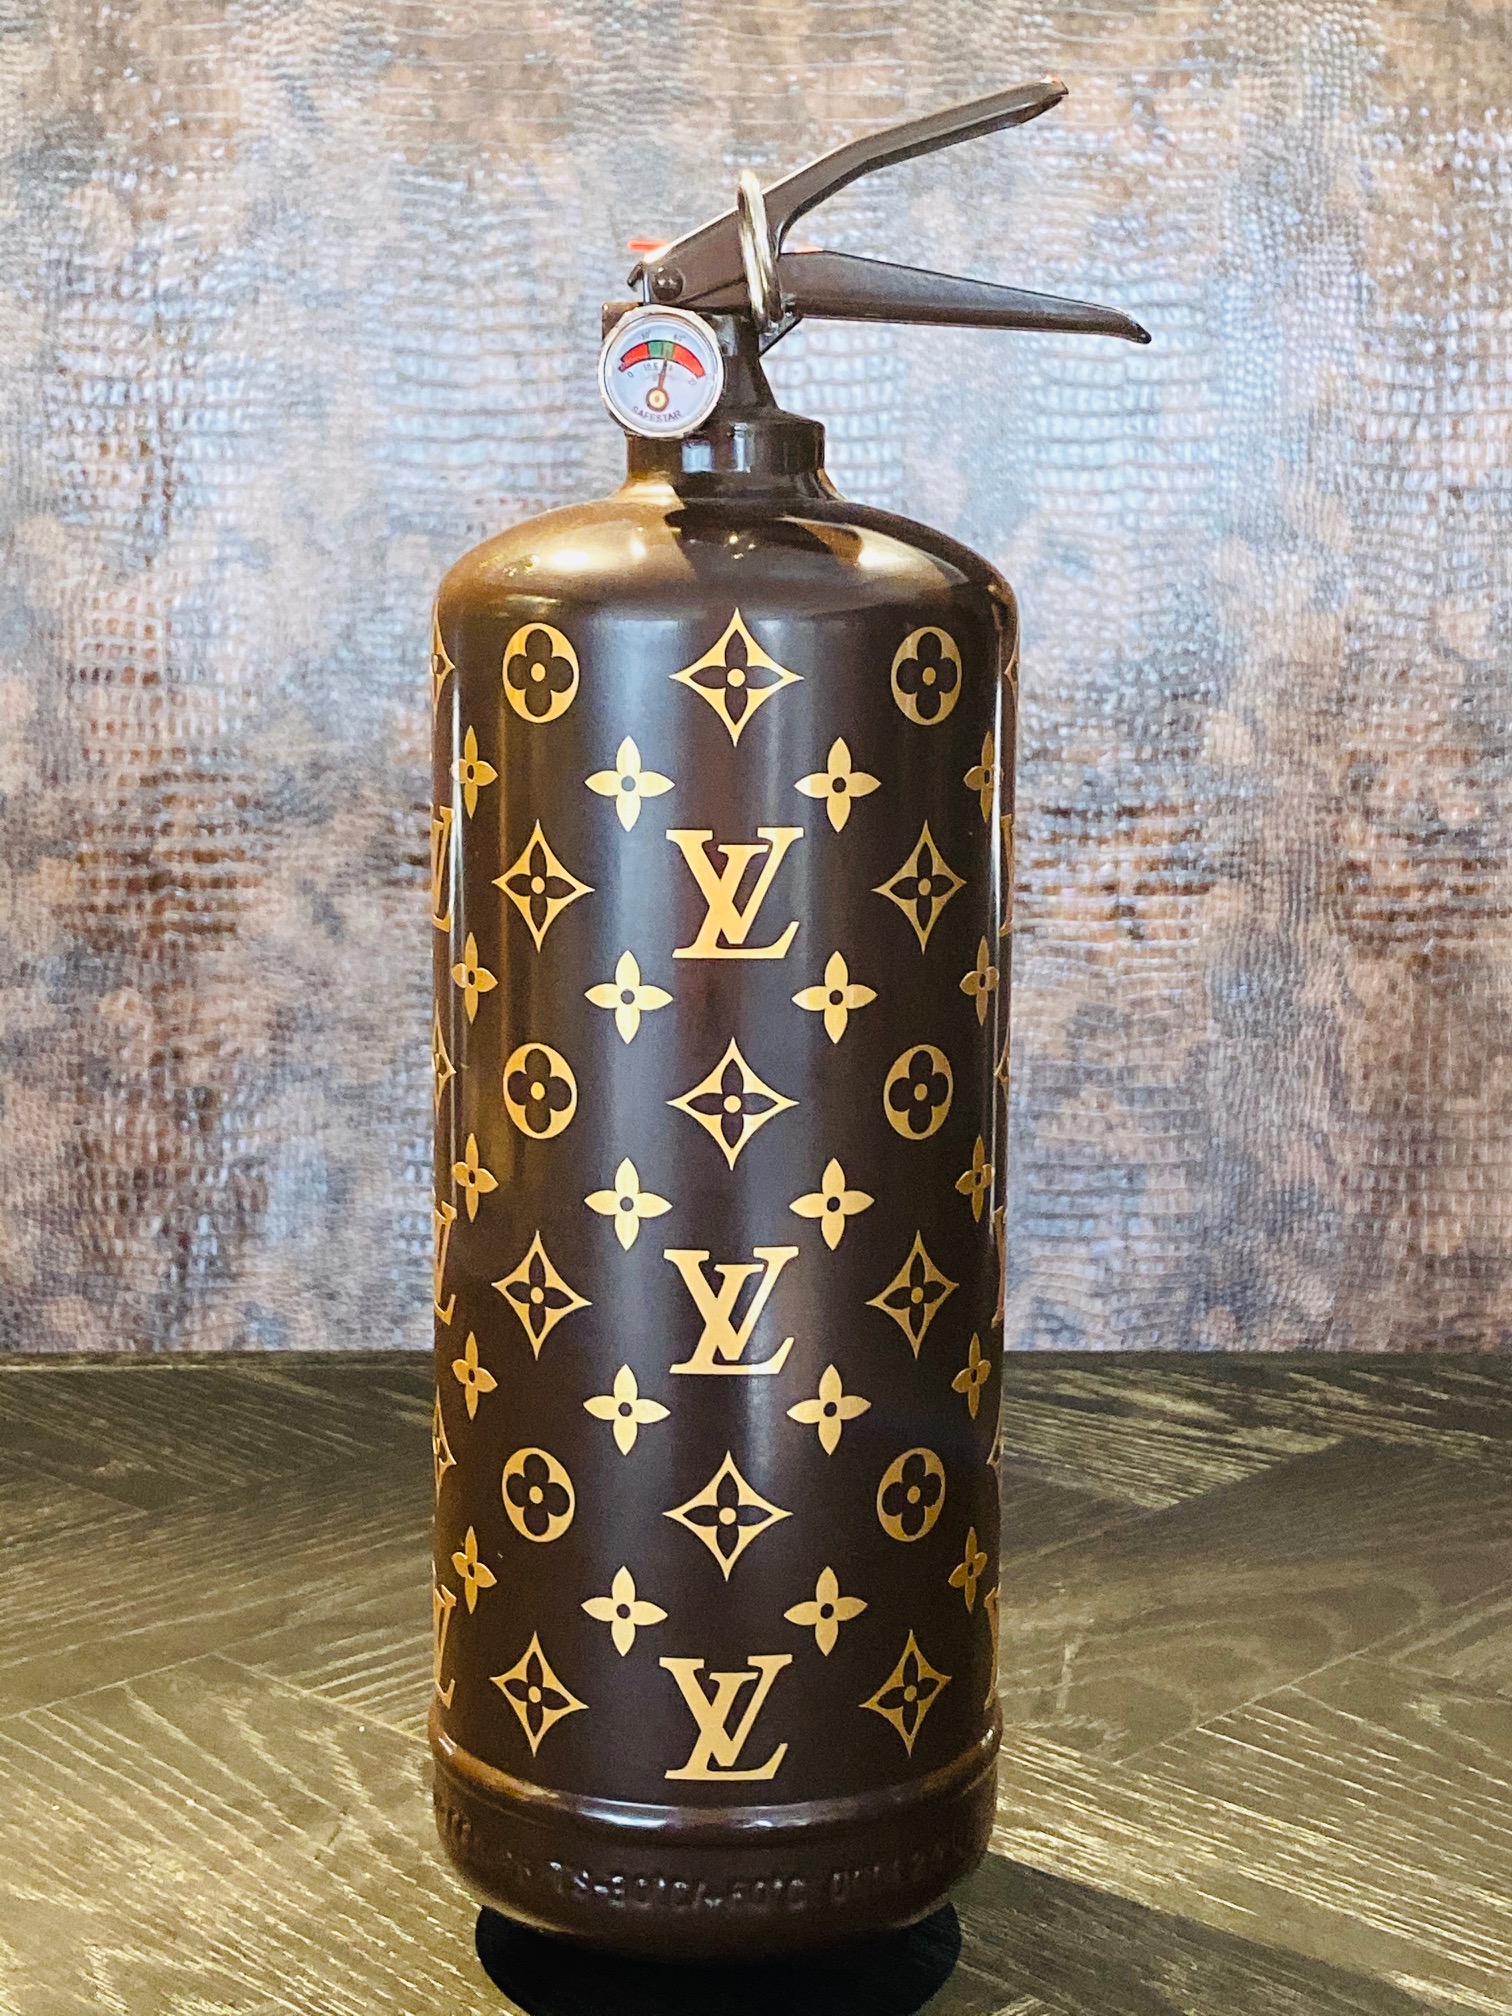 Ghost art Louis Vuitton Extinguisher | Madhouse